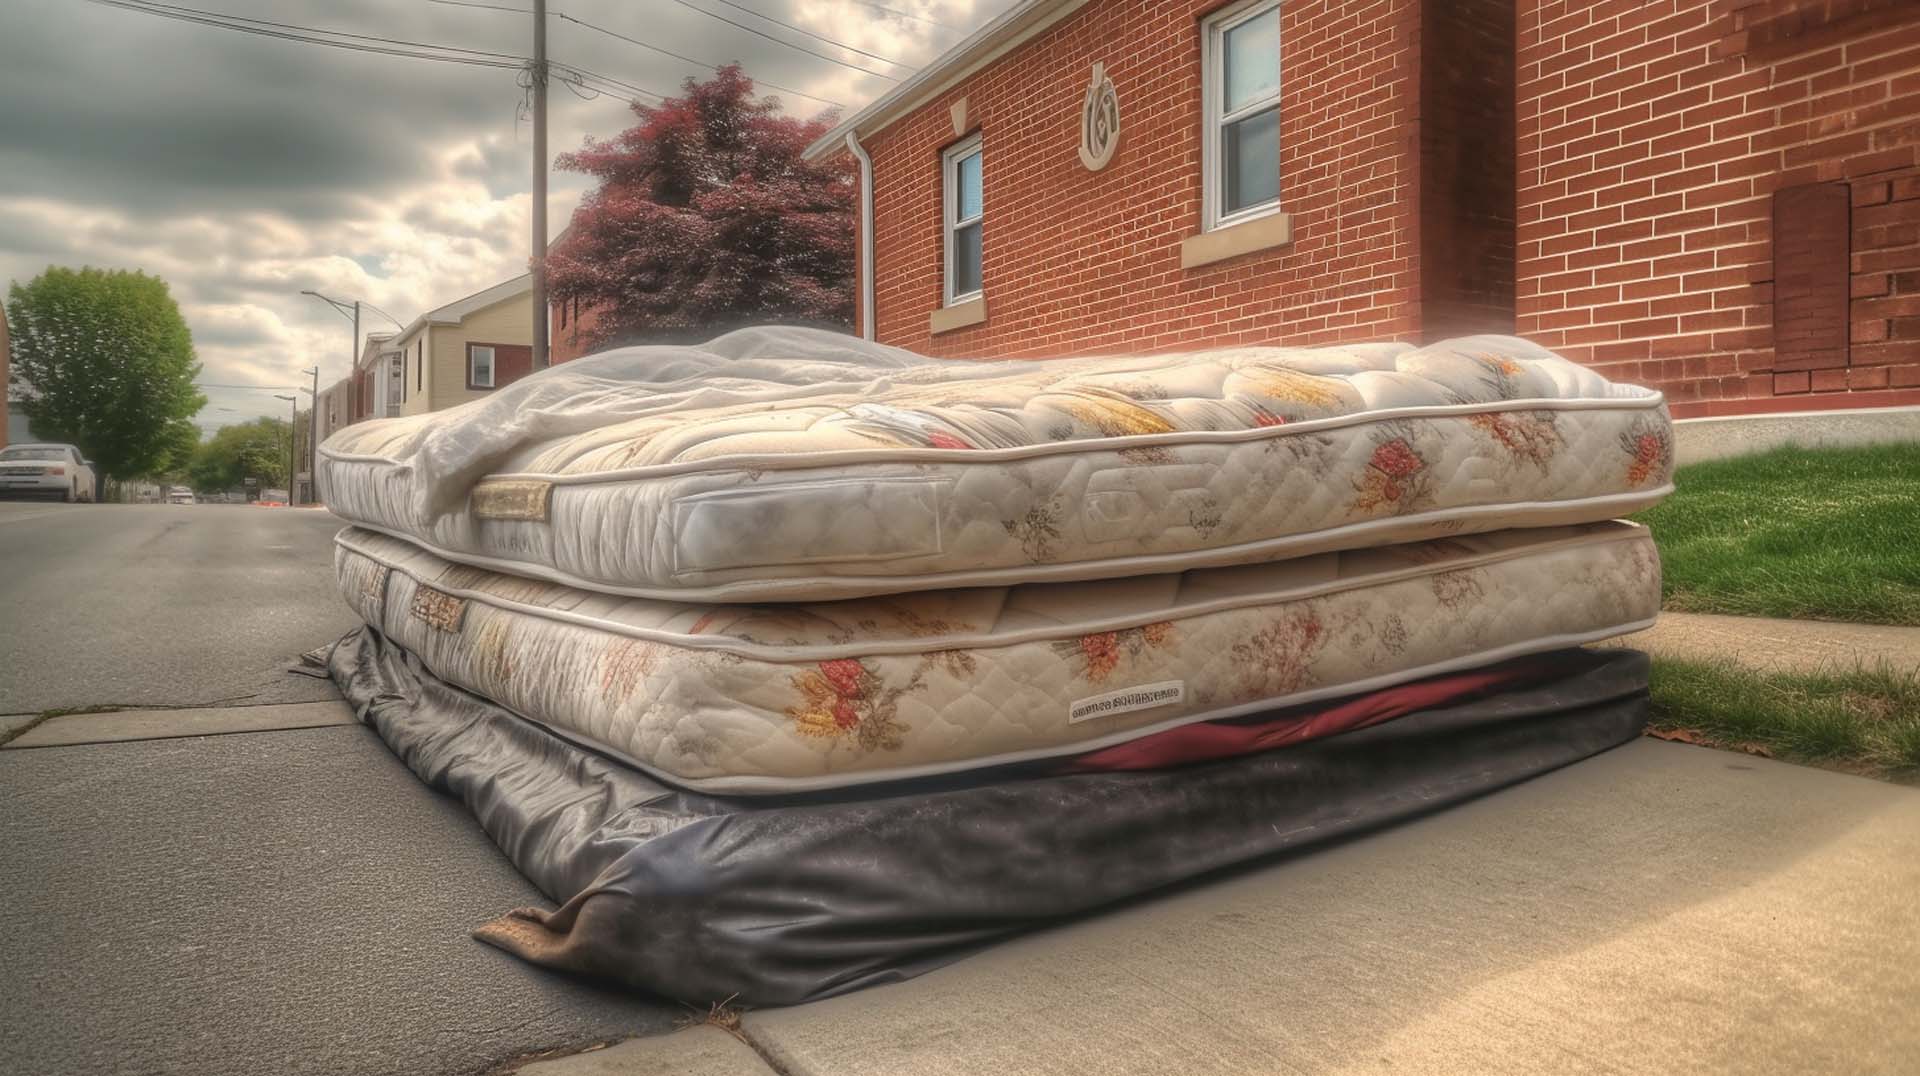 You can make sure your mattress removal is done properly by hiring a professional service in Kentville